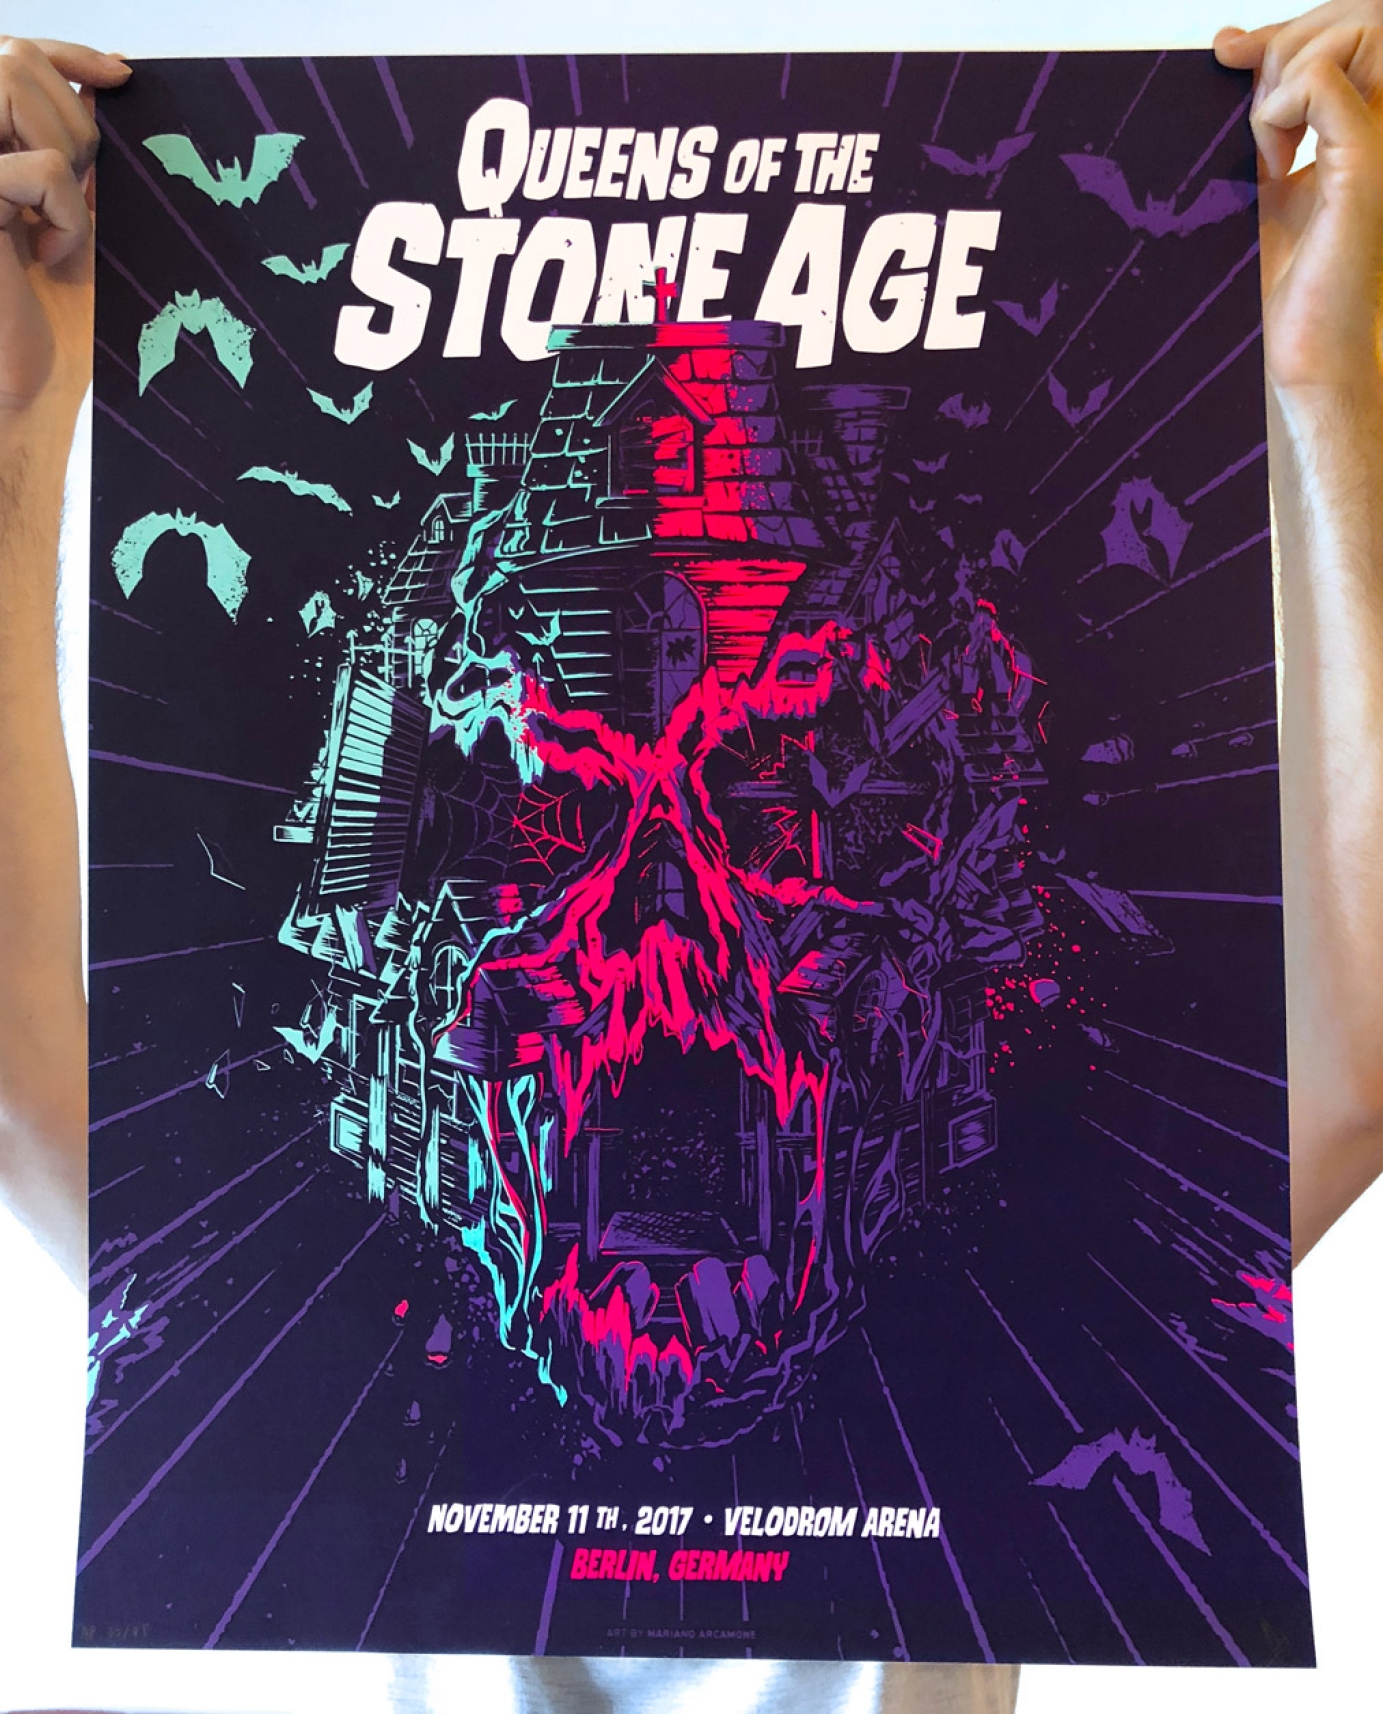 Merchandise for Queens of the Stone Age by Mariano Arcamone